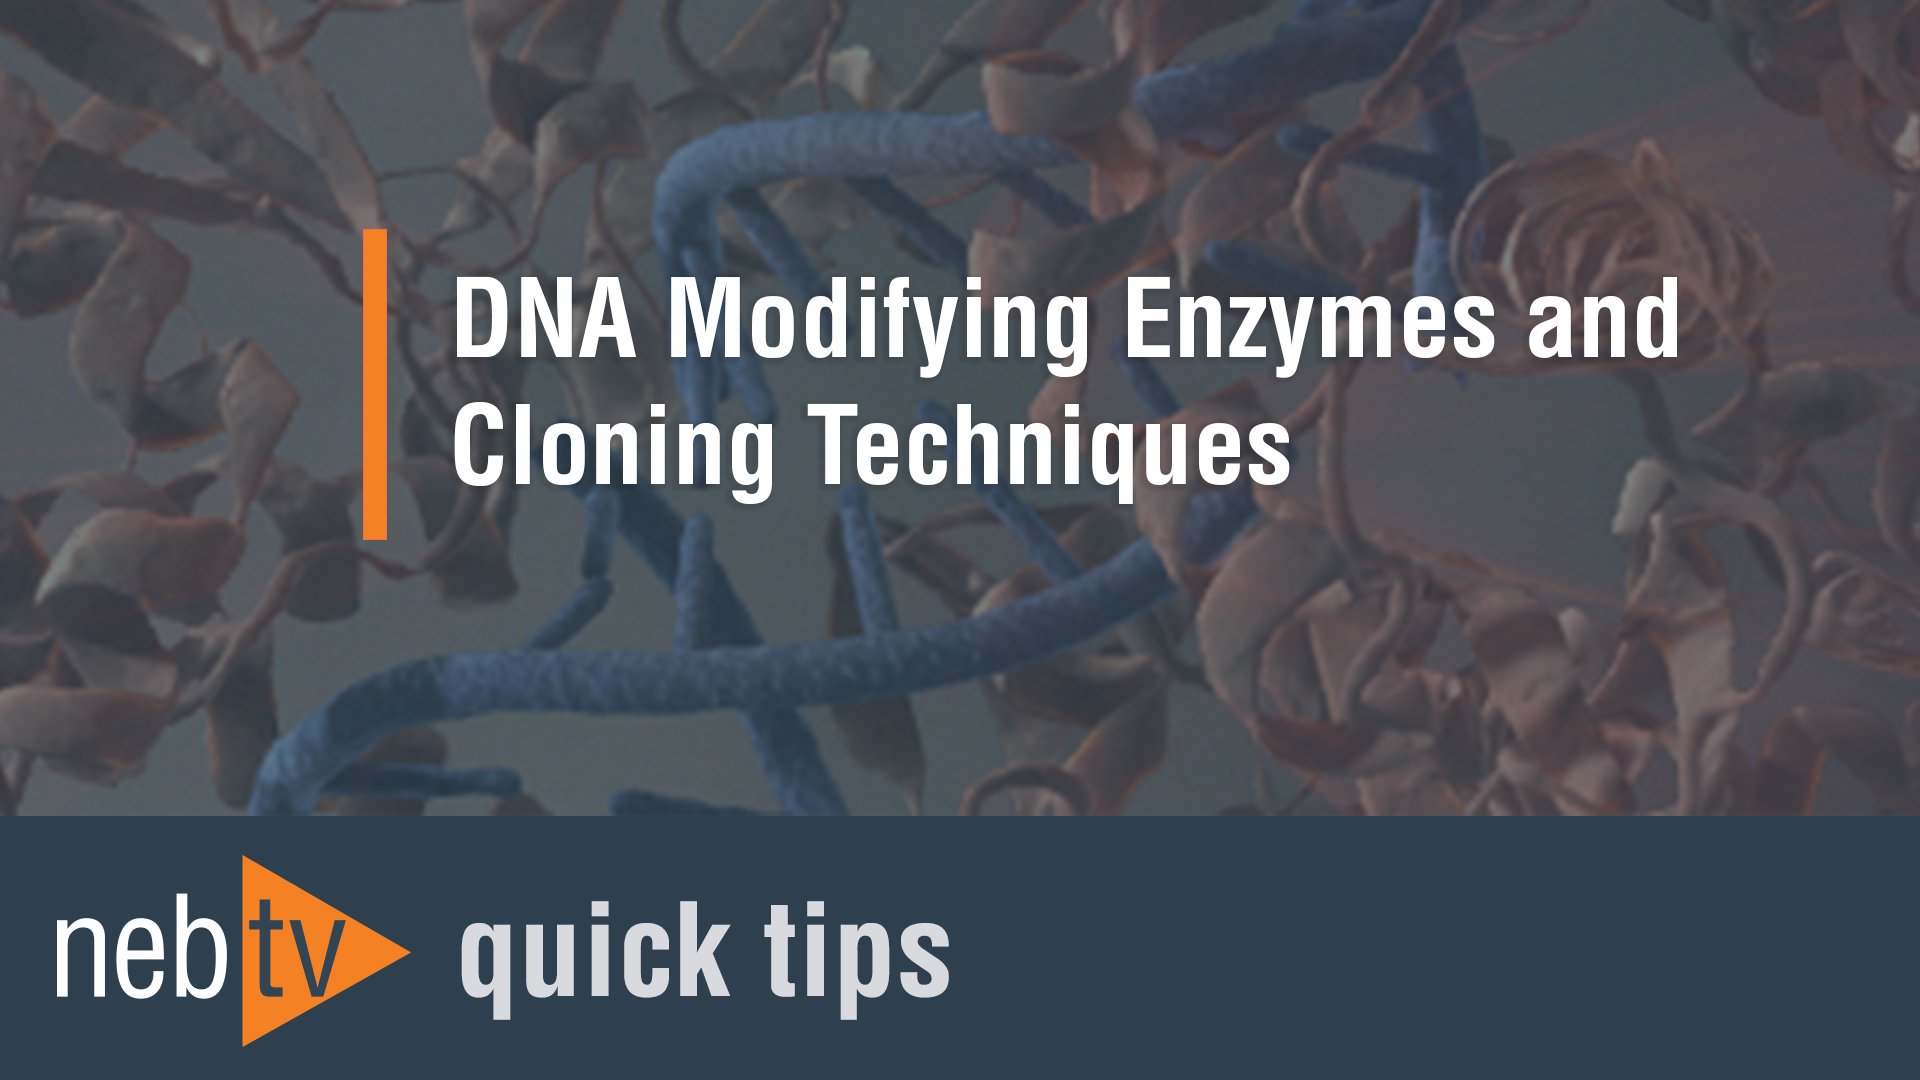 NEBTV_DNA-Modifying-Enzymes-and-Cloning-Techniques_1920